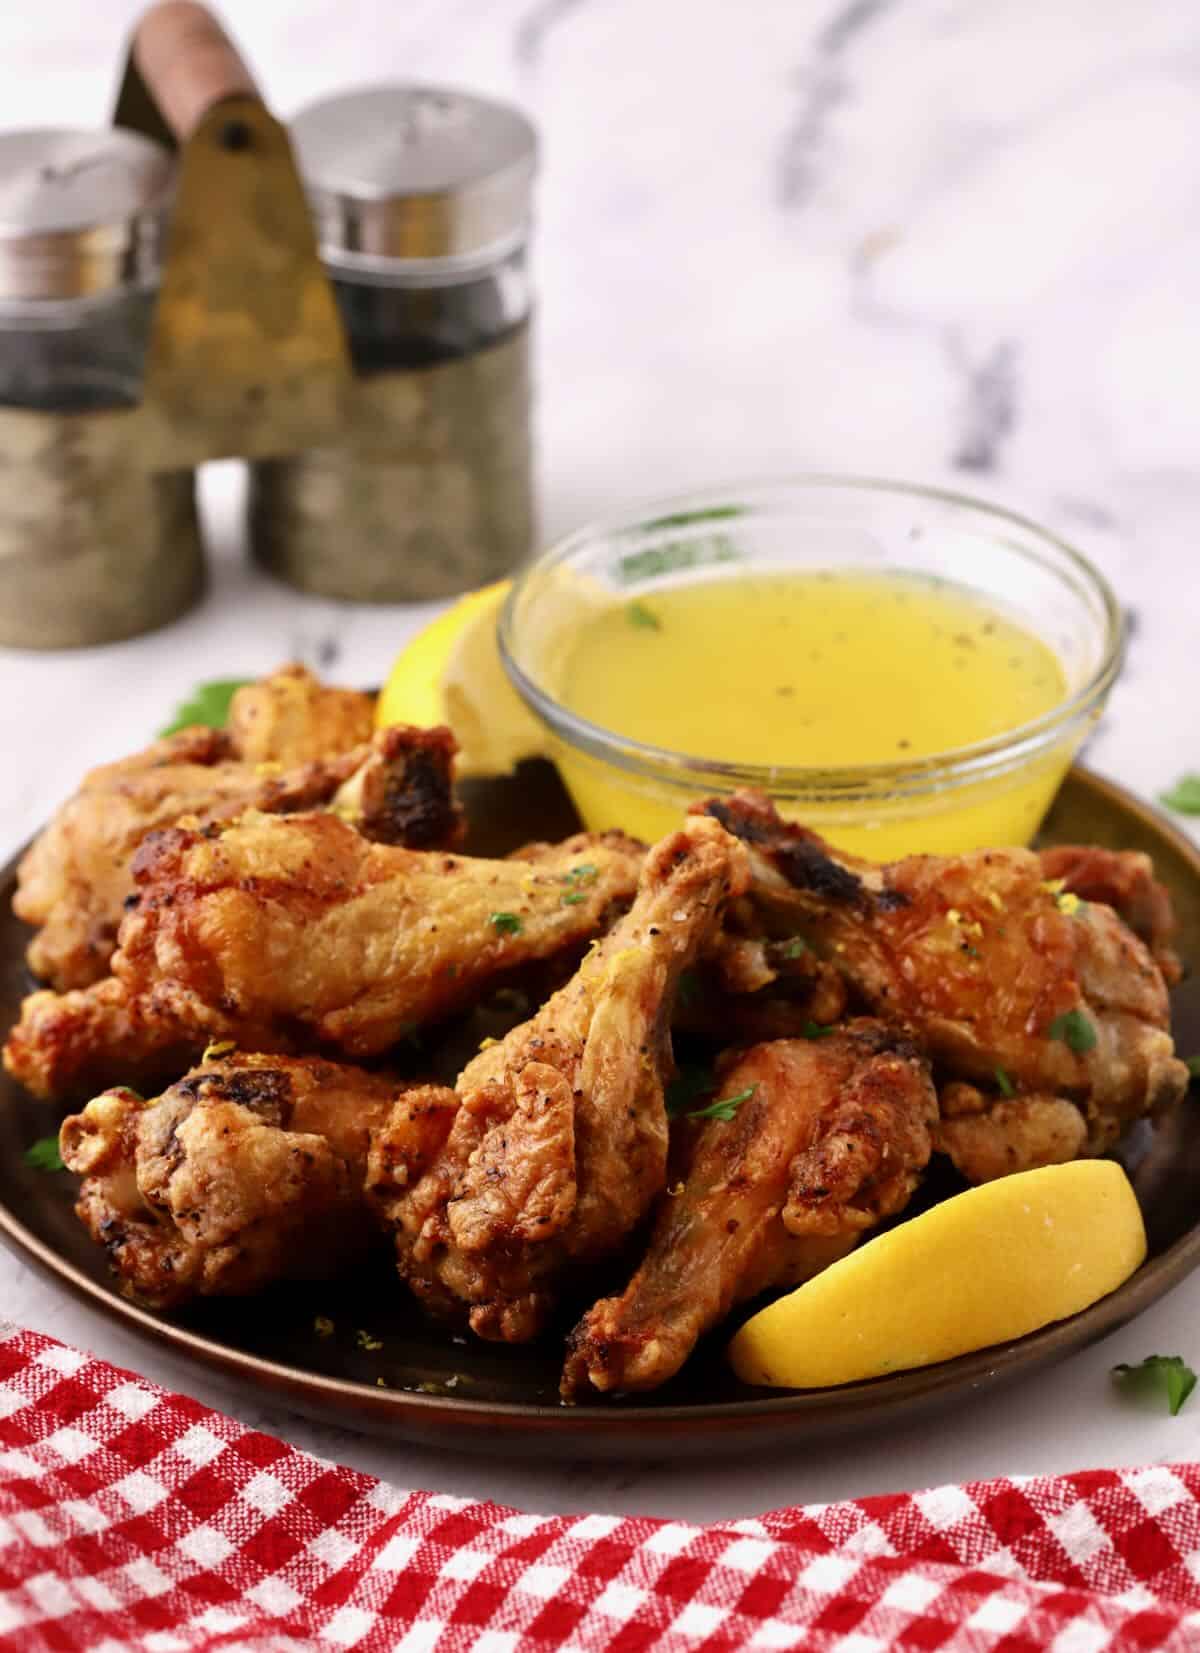 Lemon pepper chicken wings on a bronze plate with a dipping sauce.